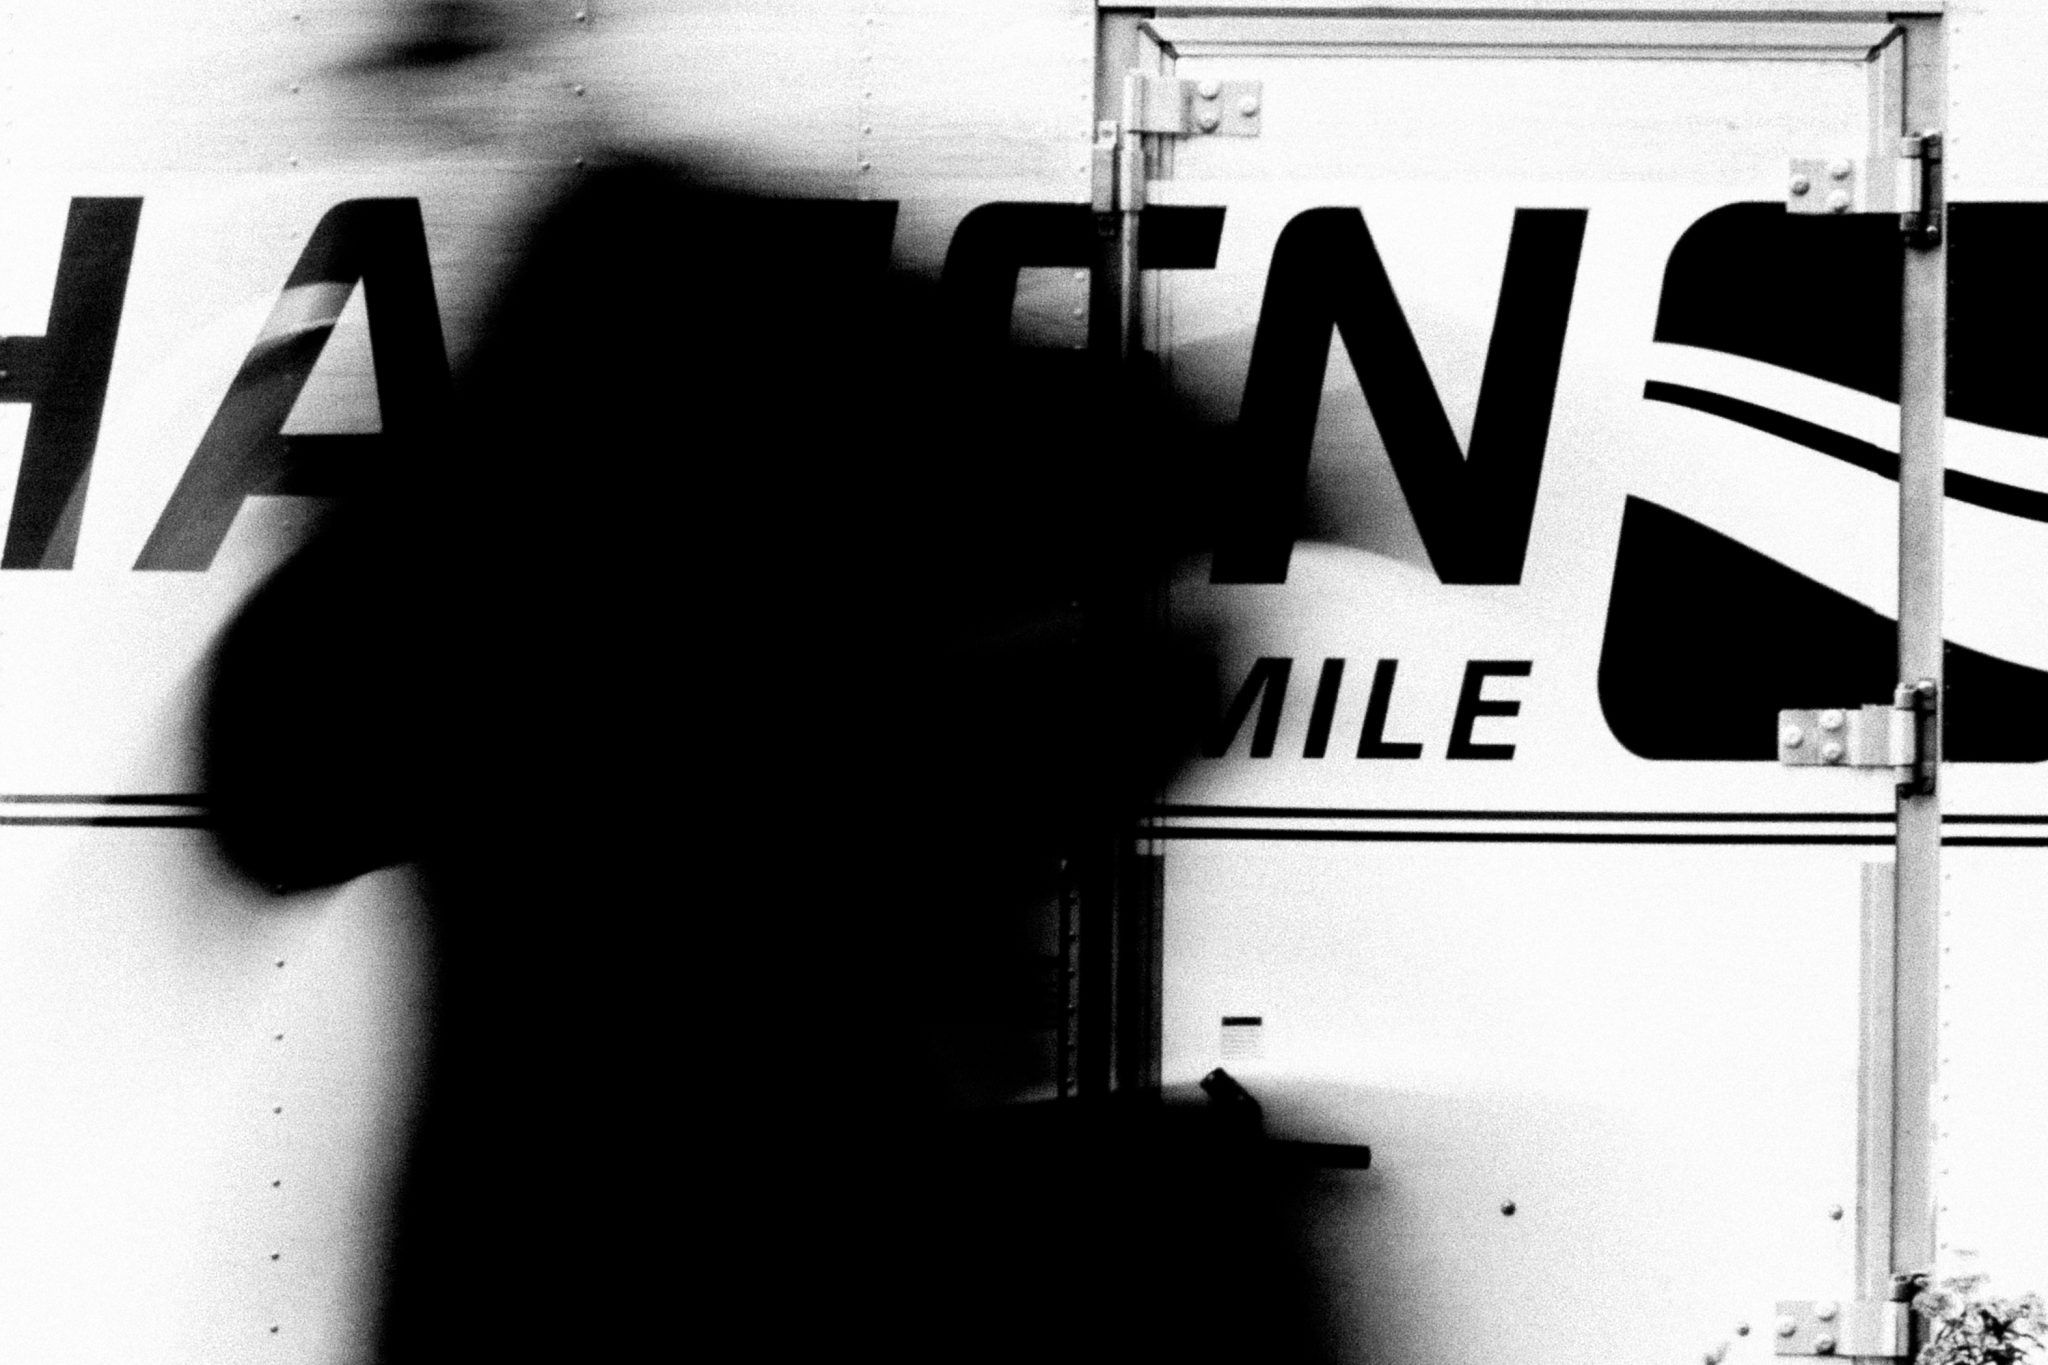 A blurred woman in front of a delivery truck shot by Jay Sennett with a Canon 60D while pulling focus.